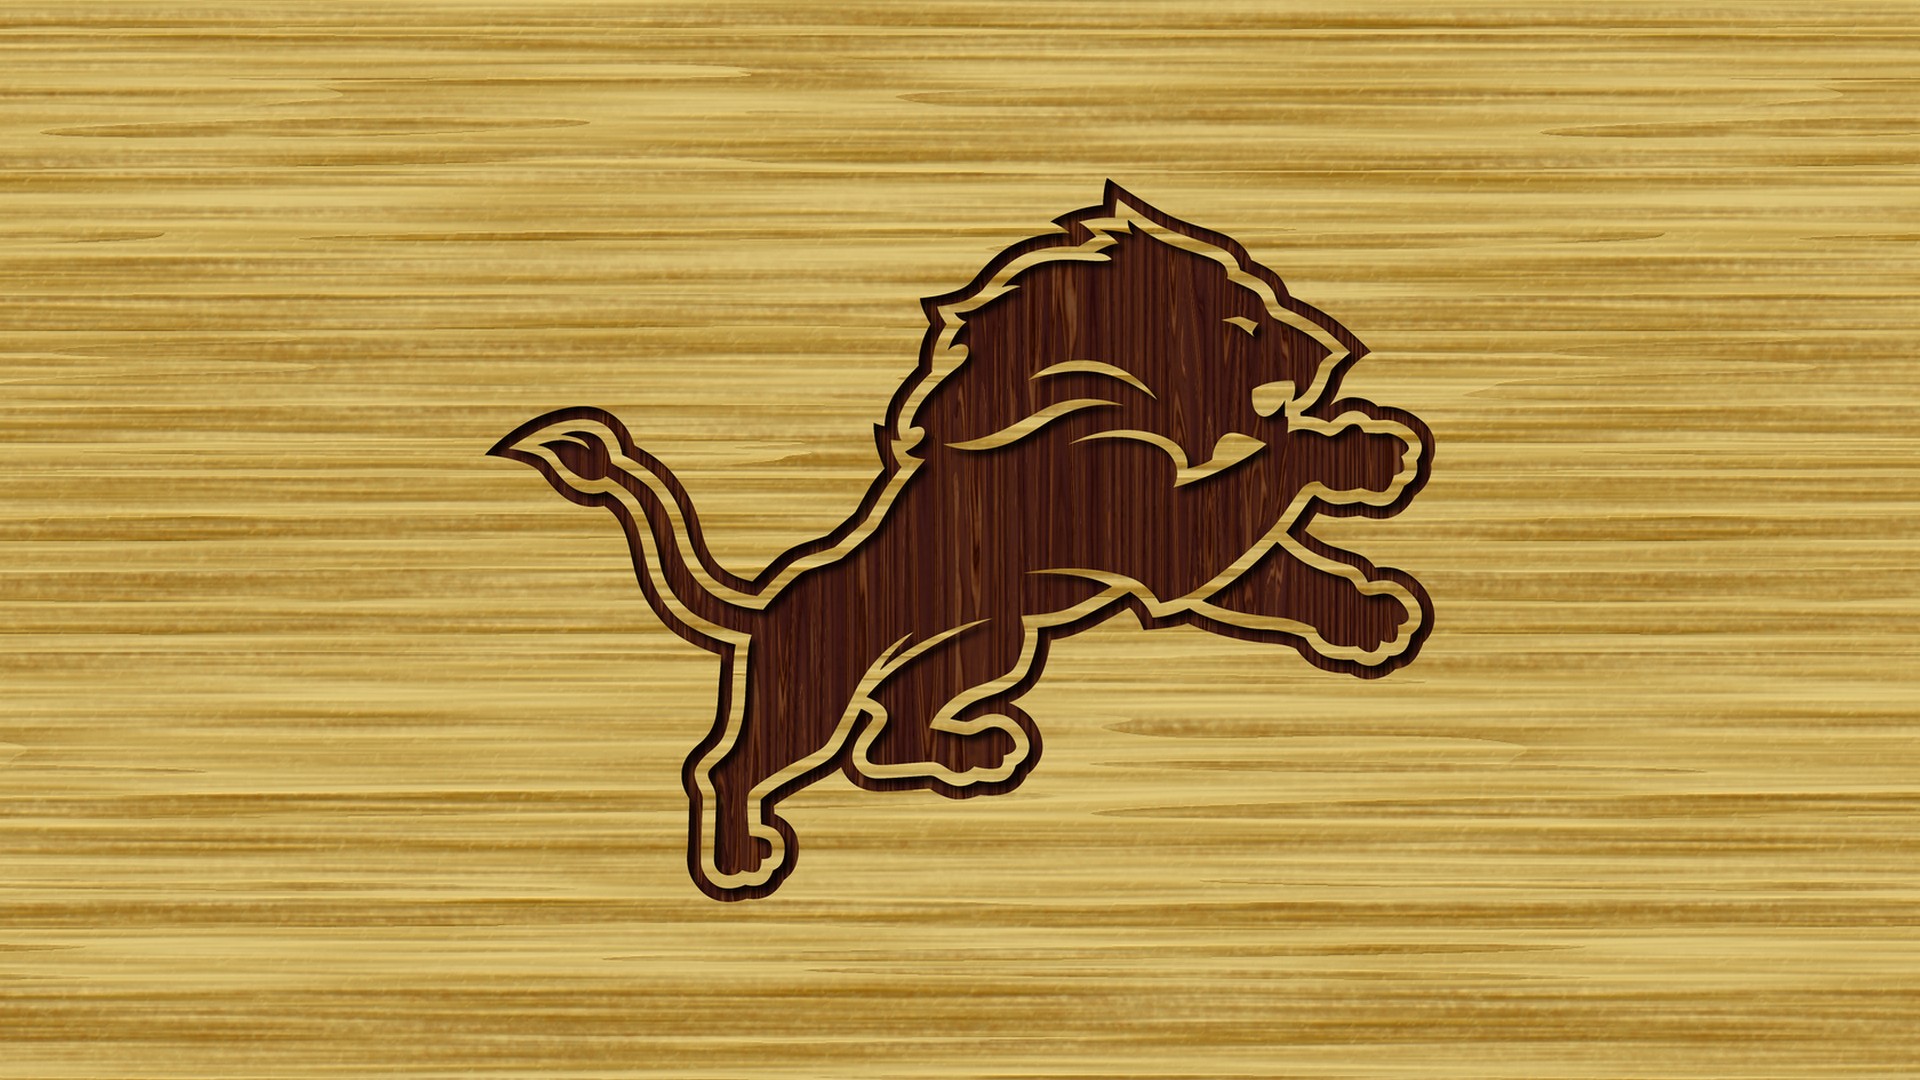 Detroit Lions Laptop Wallpaper with high-resolution 1920x1080 pixel. Download and set as wallpaper for Desktop Computer, Apple iPhone X, XS Max, XR, 8, 7, 6, SE, iPad, Android